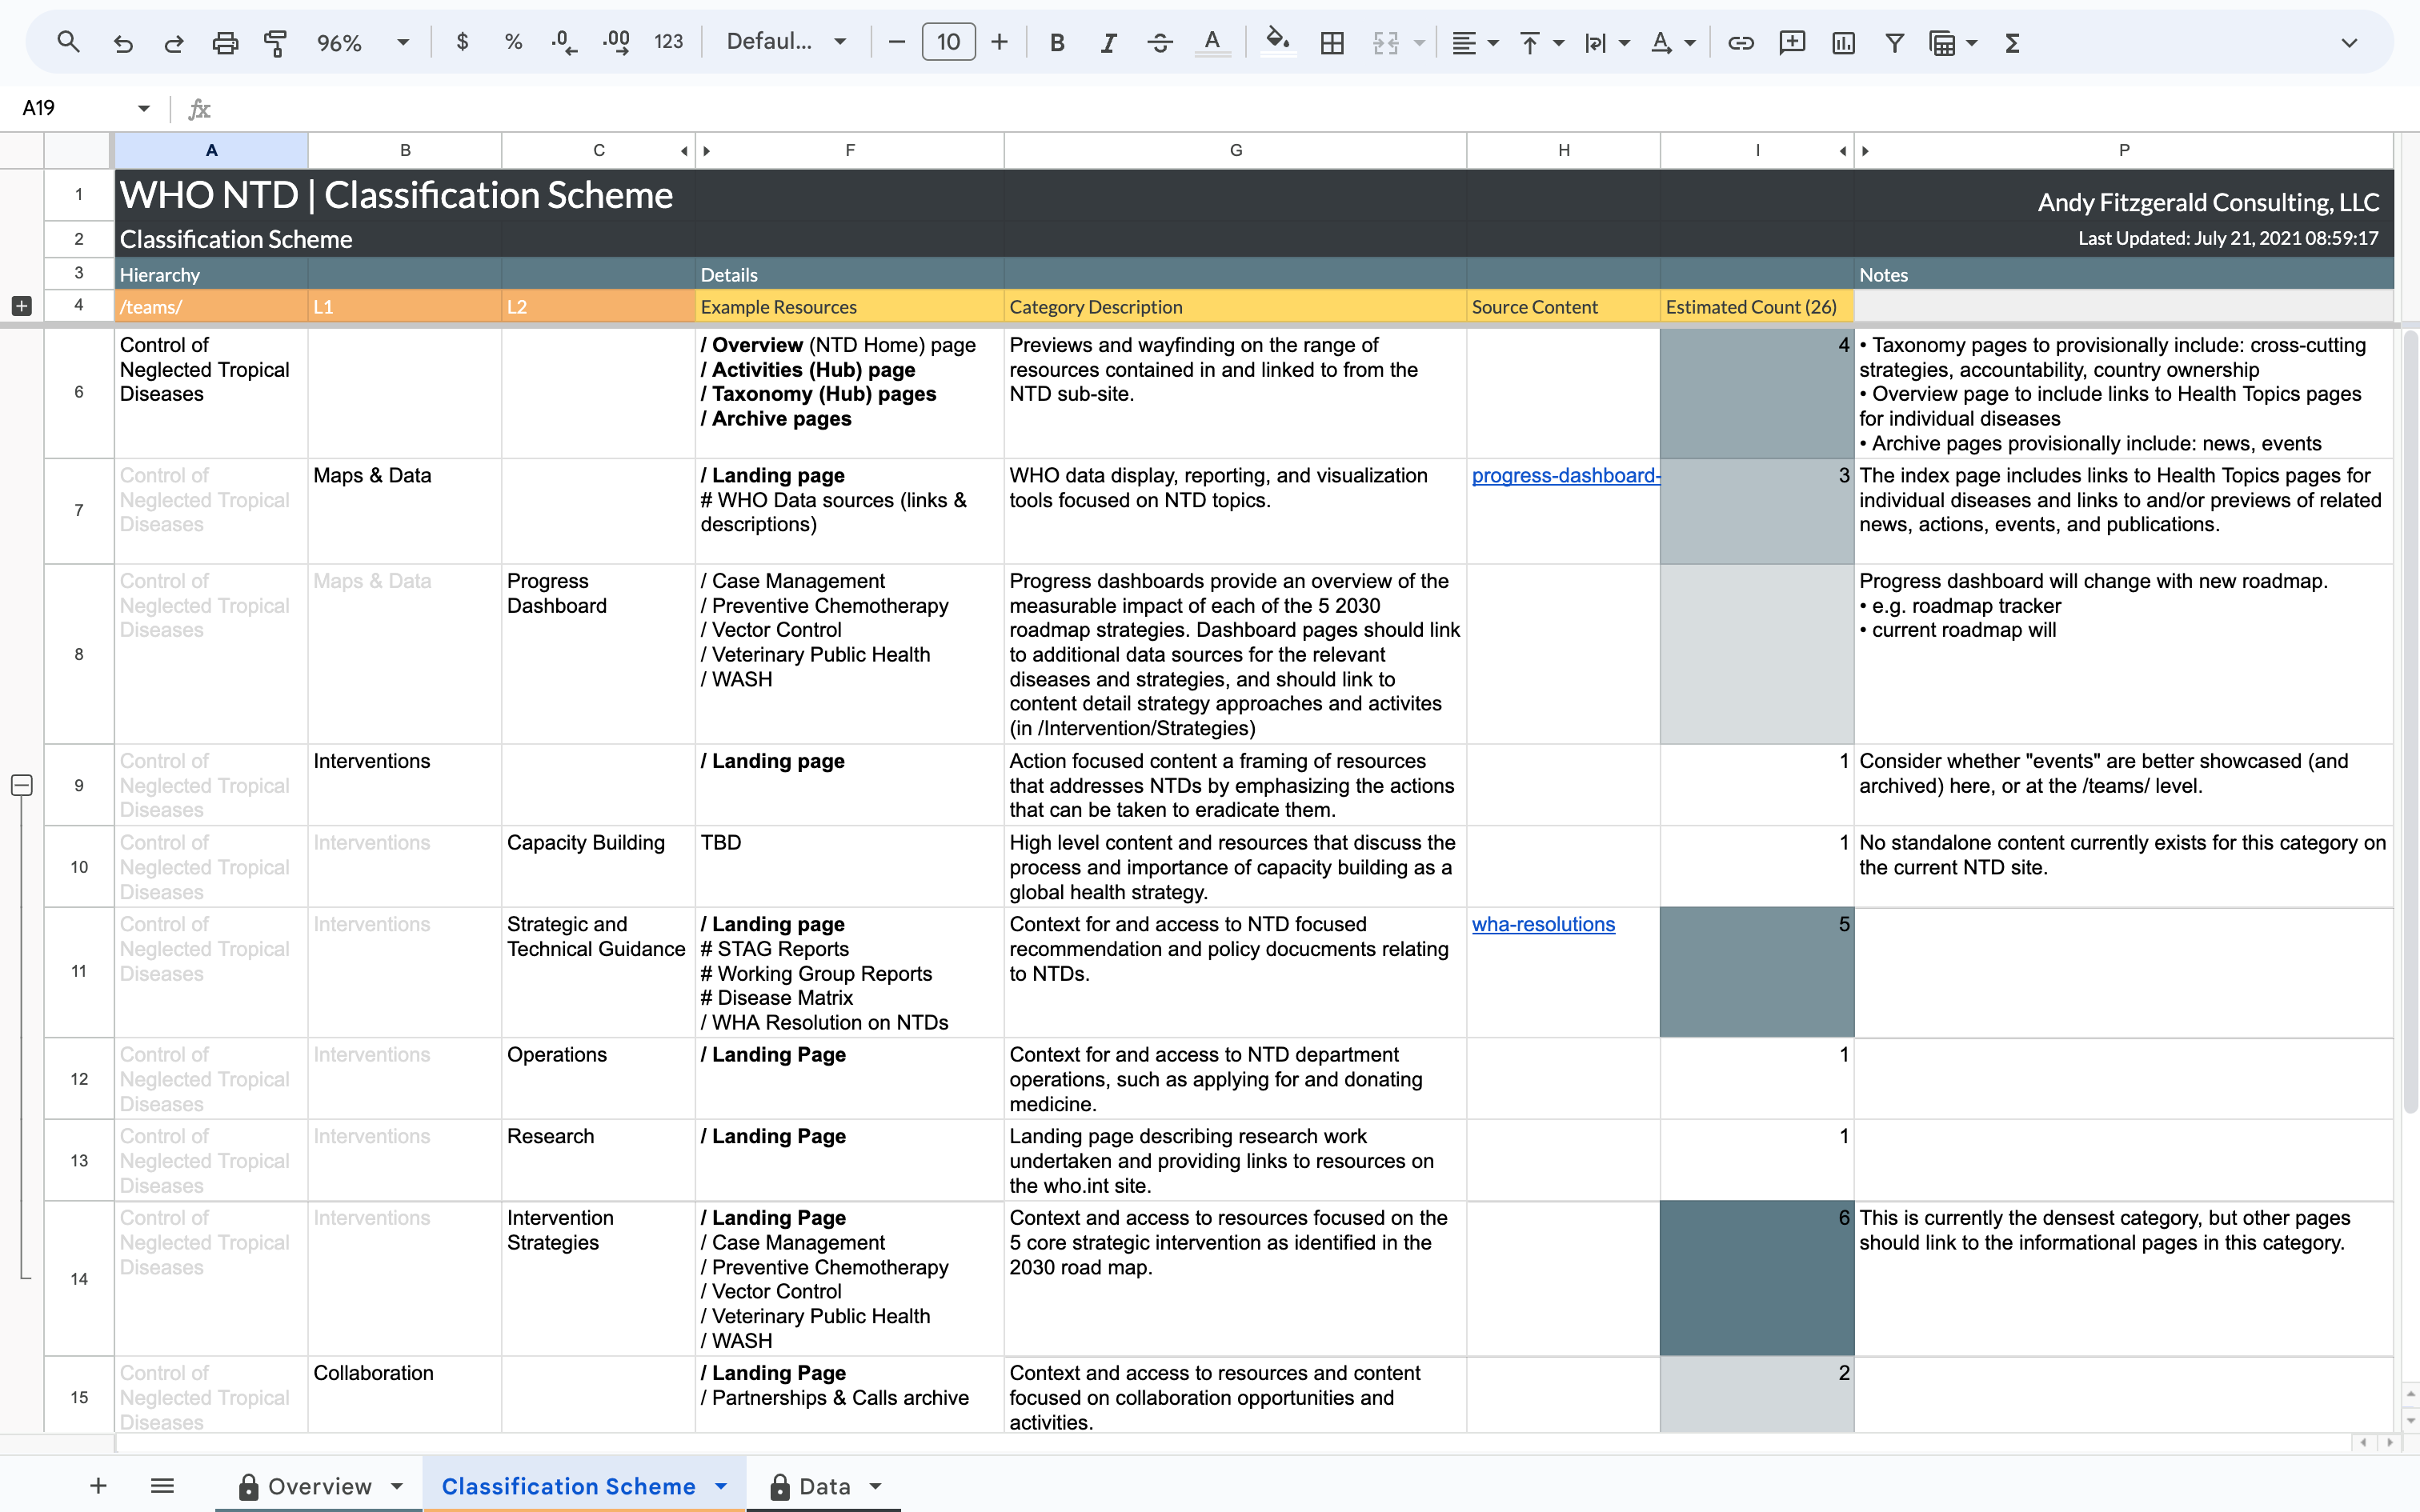 A screen capture of the WHO NTD classification scheme, documented in a spreadsheet